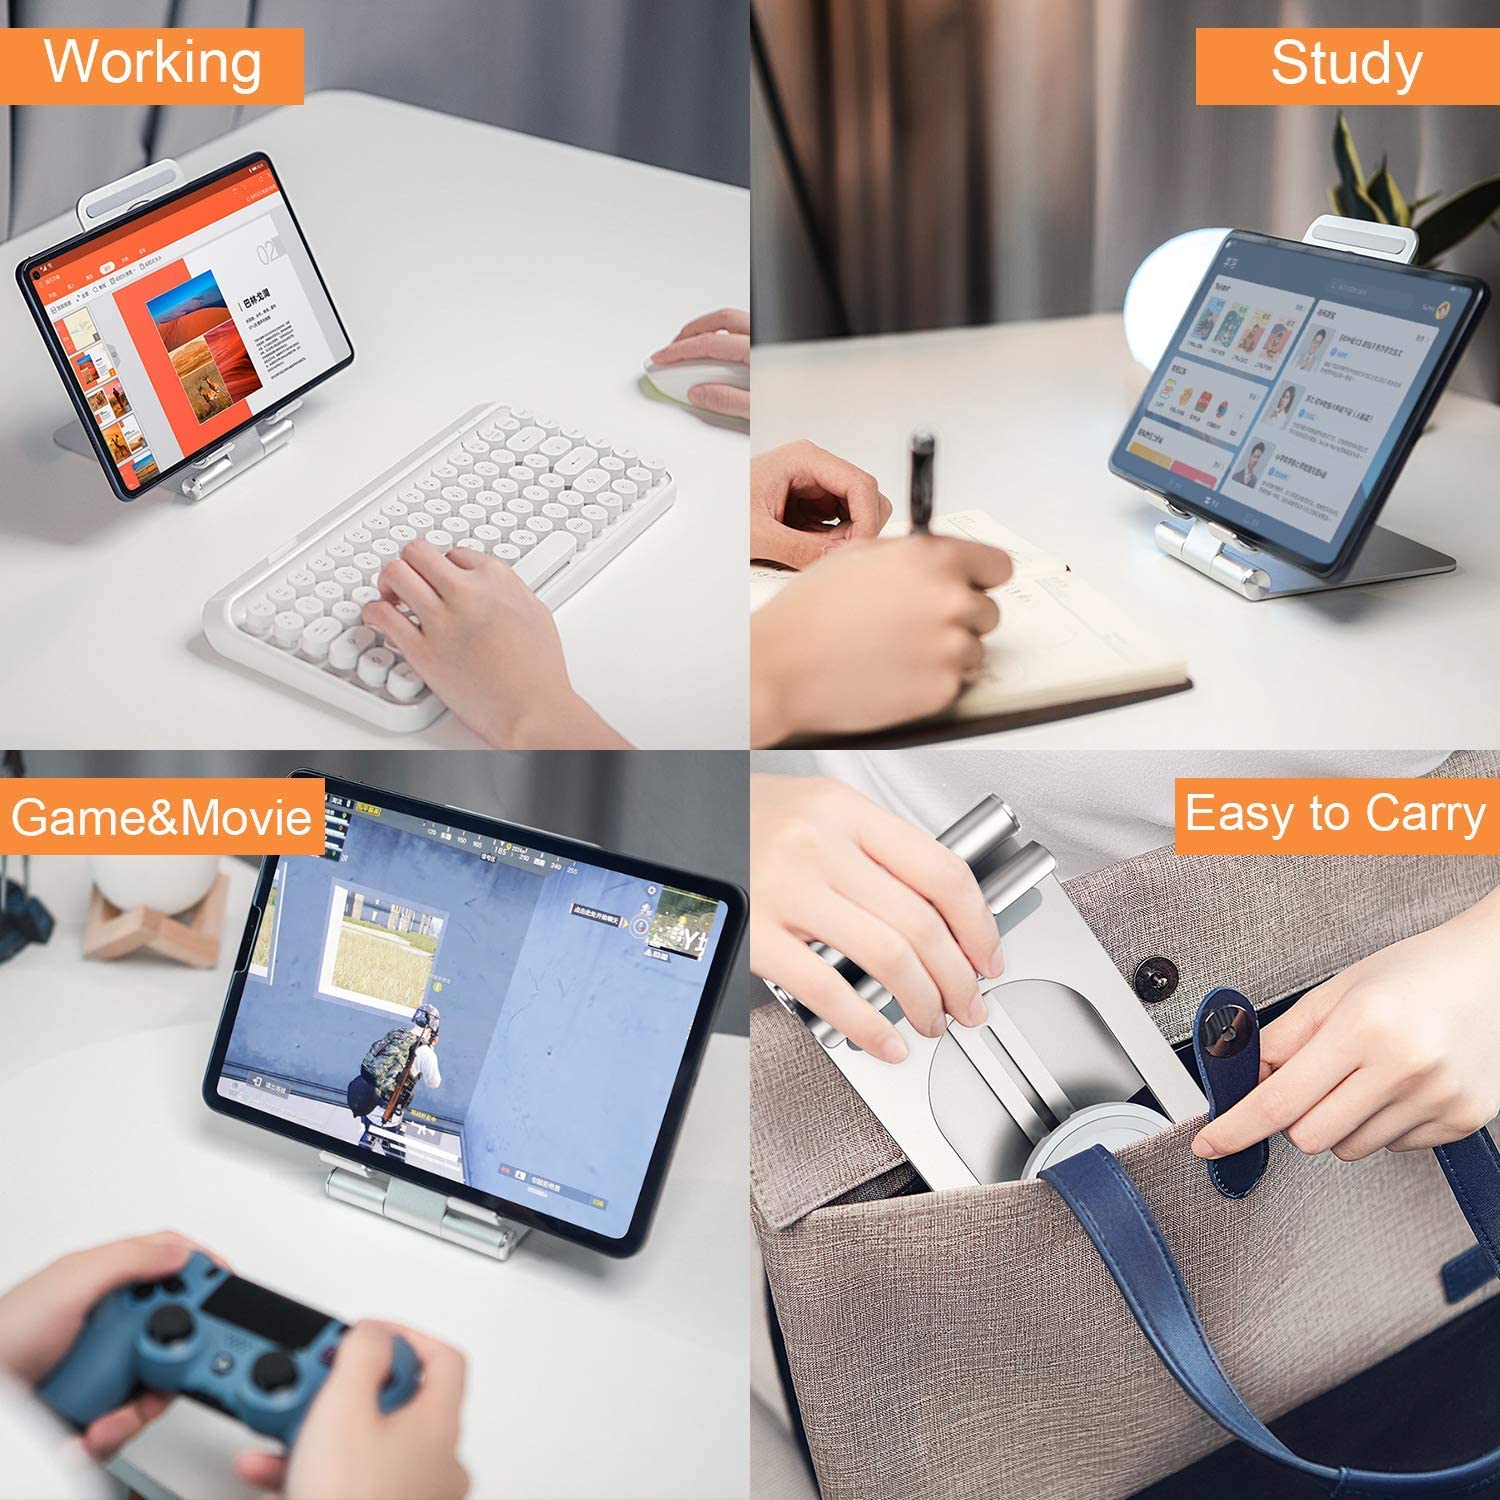 2 in 1 Wireless Charging Tablet Stand